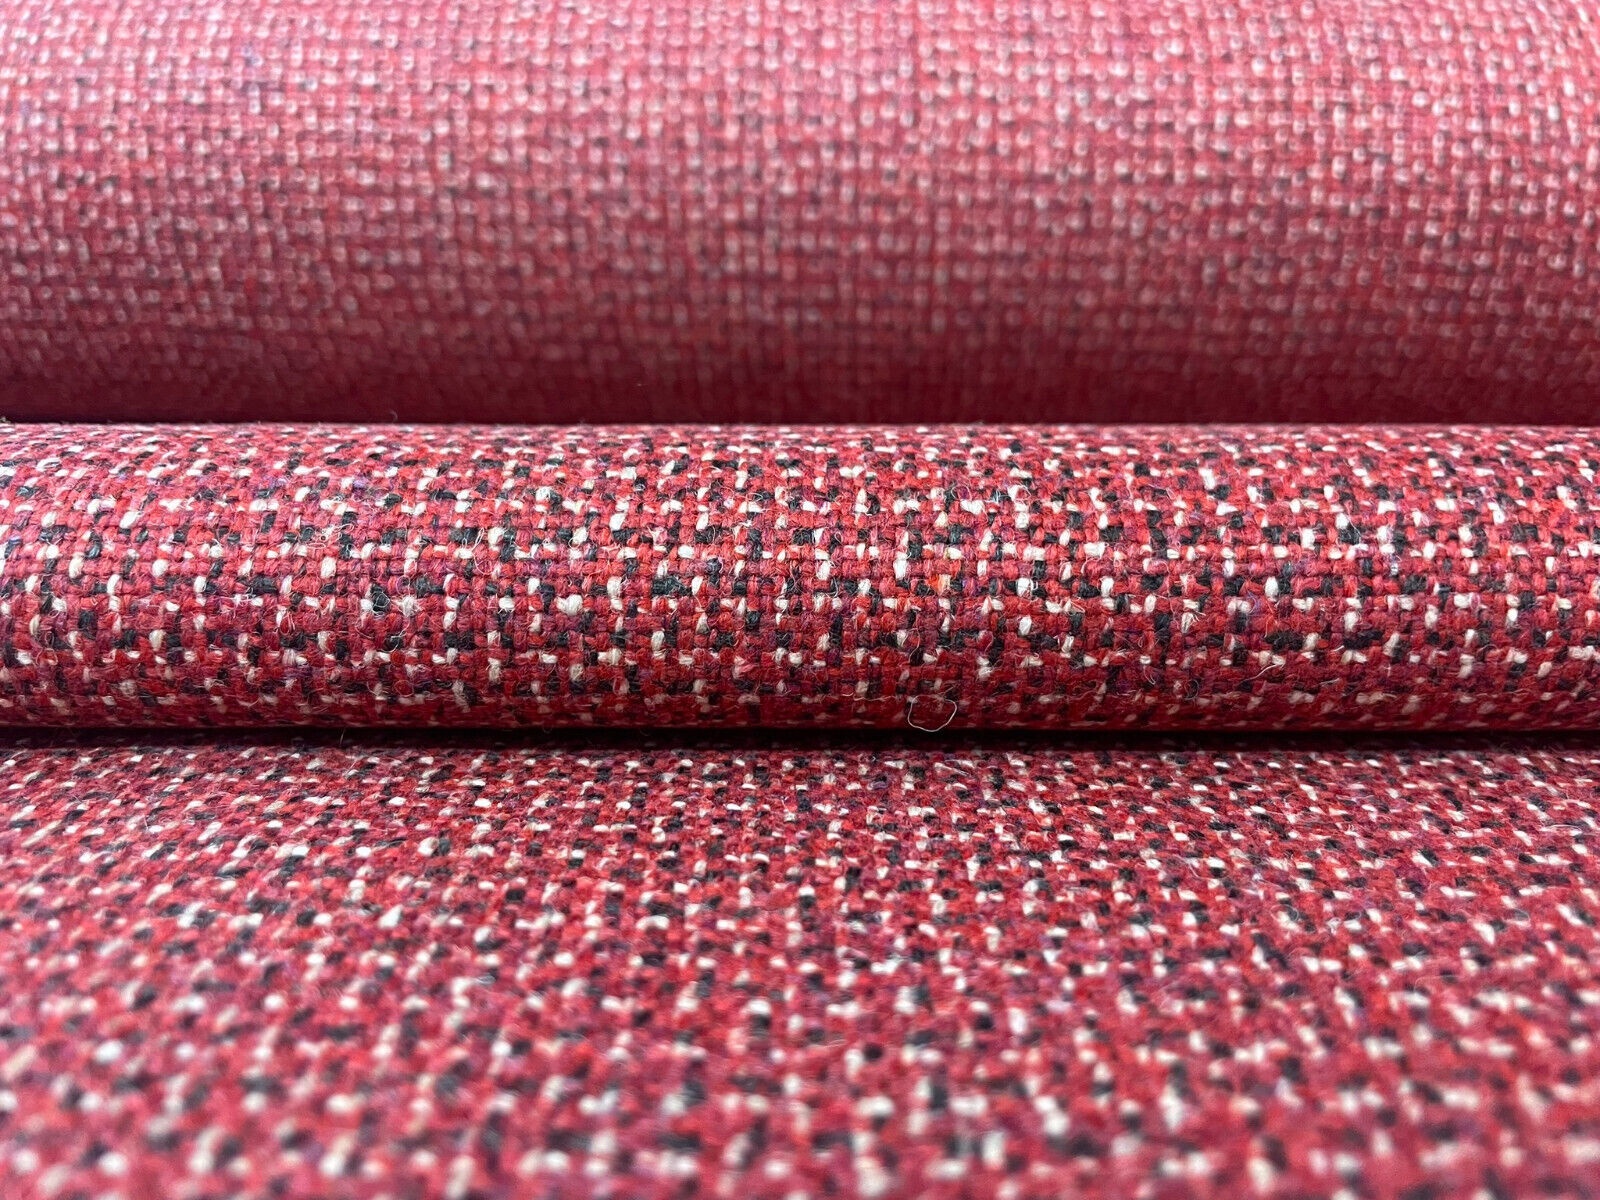 7 yds Camira Main Line Twist Spool Red Woven Wool Upholstery Fabric